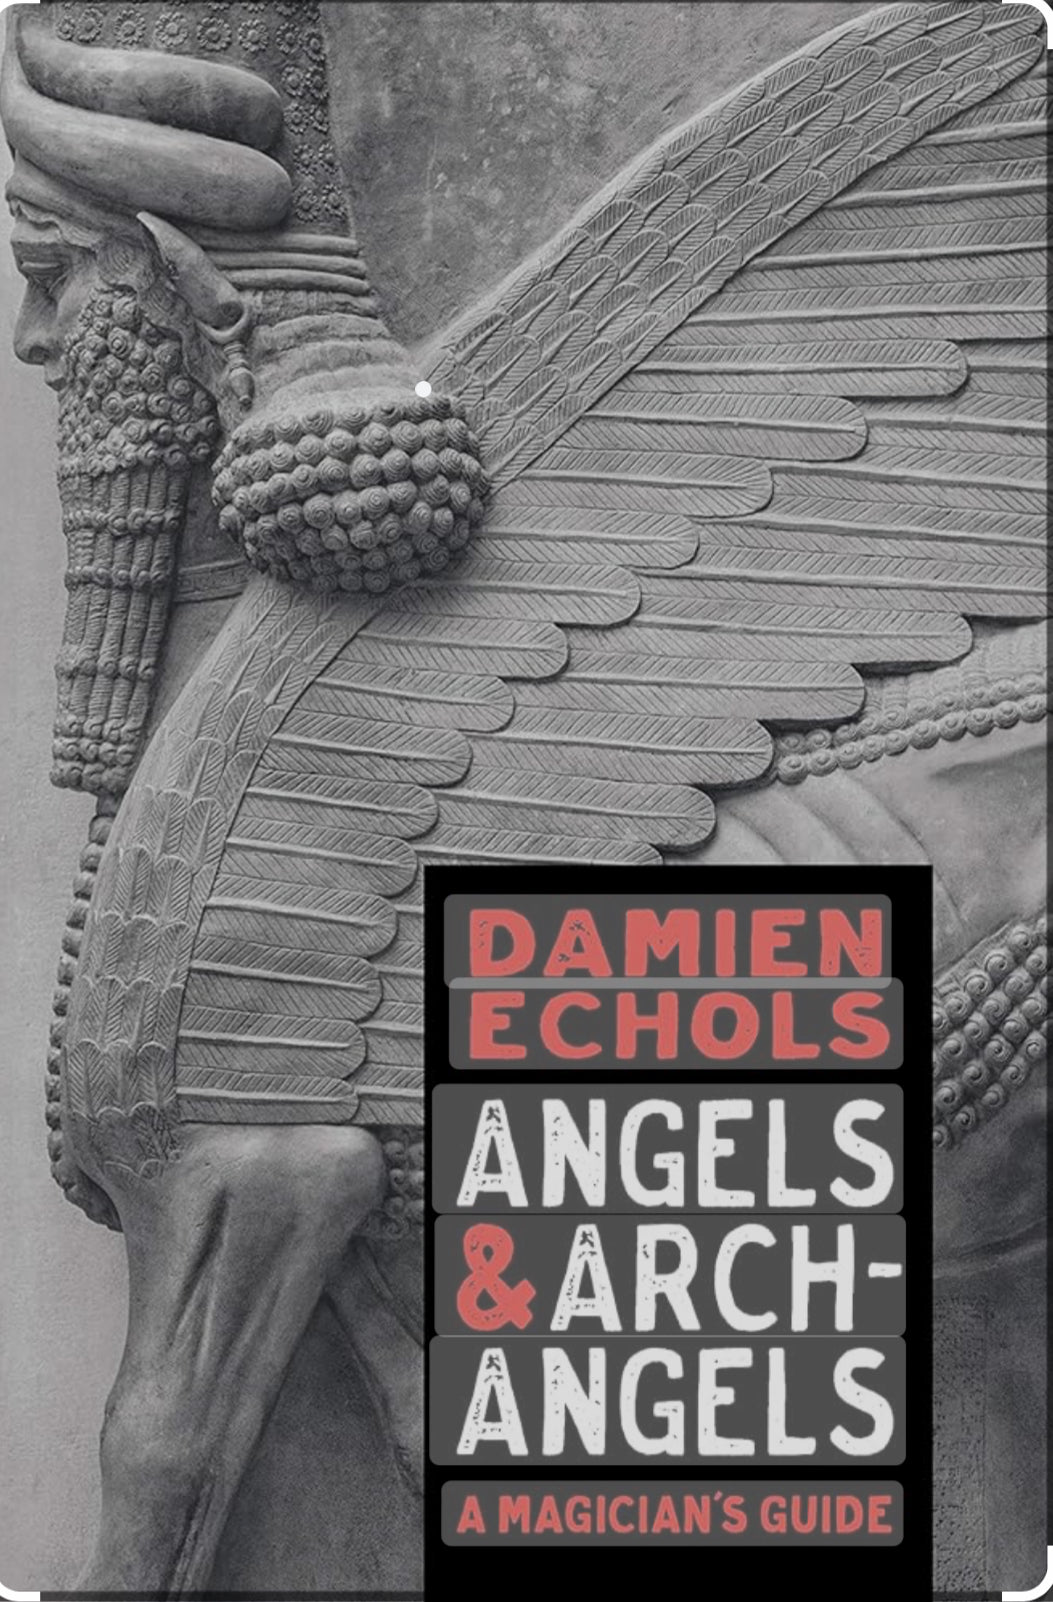 Angels and Archangels: A Magician's Guide by Damien Echols